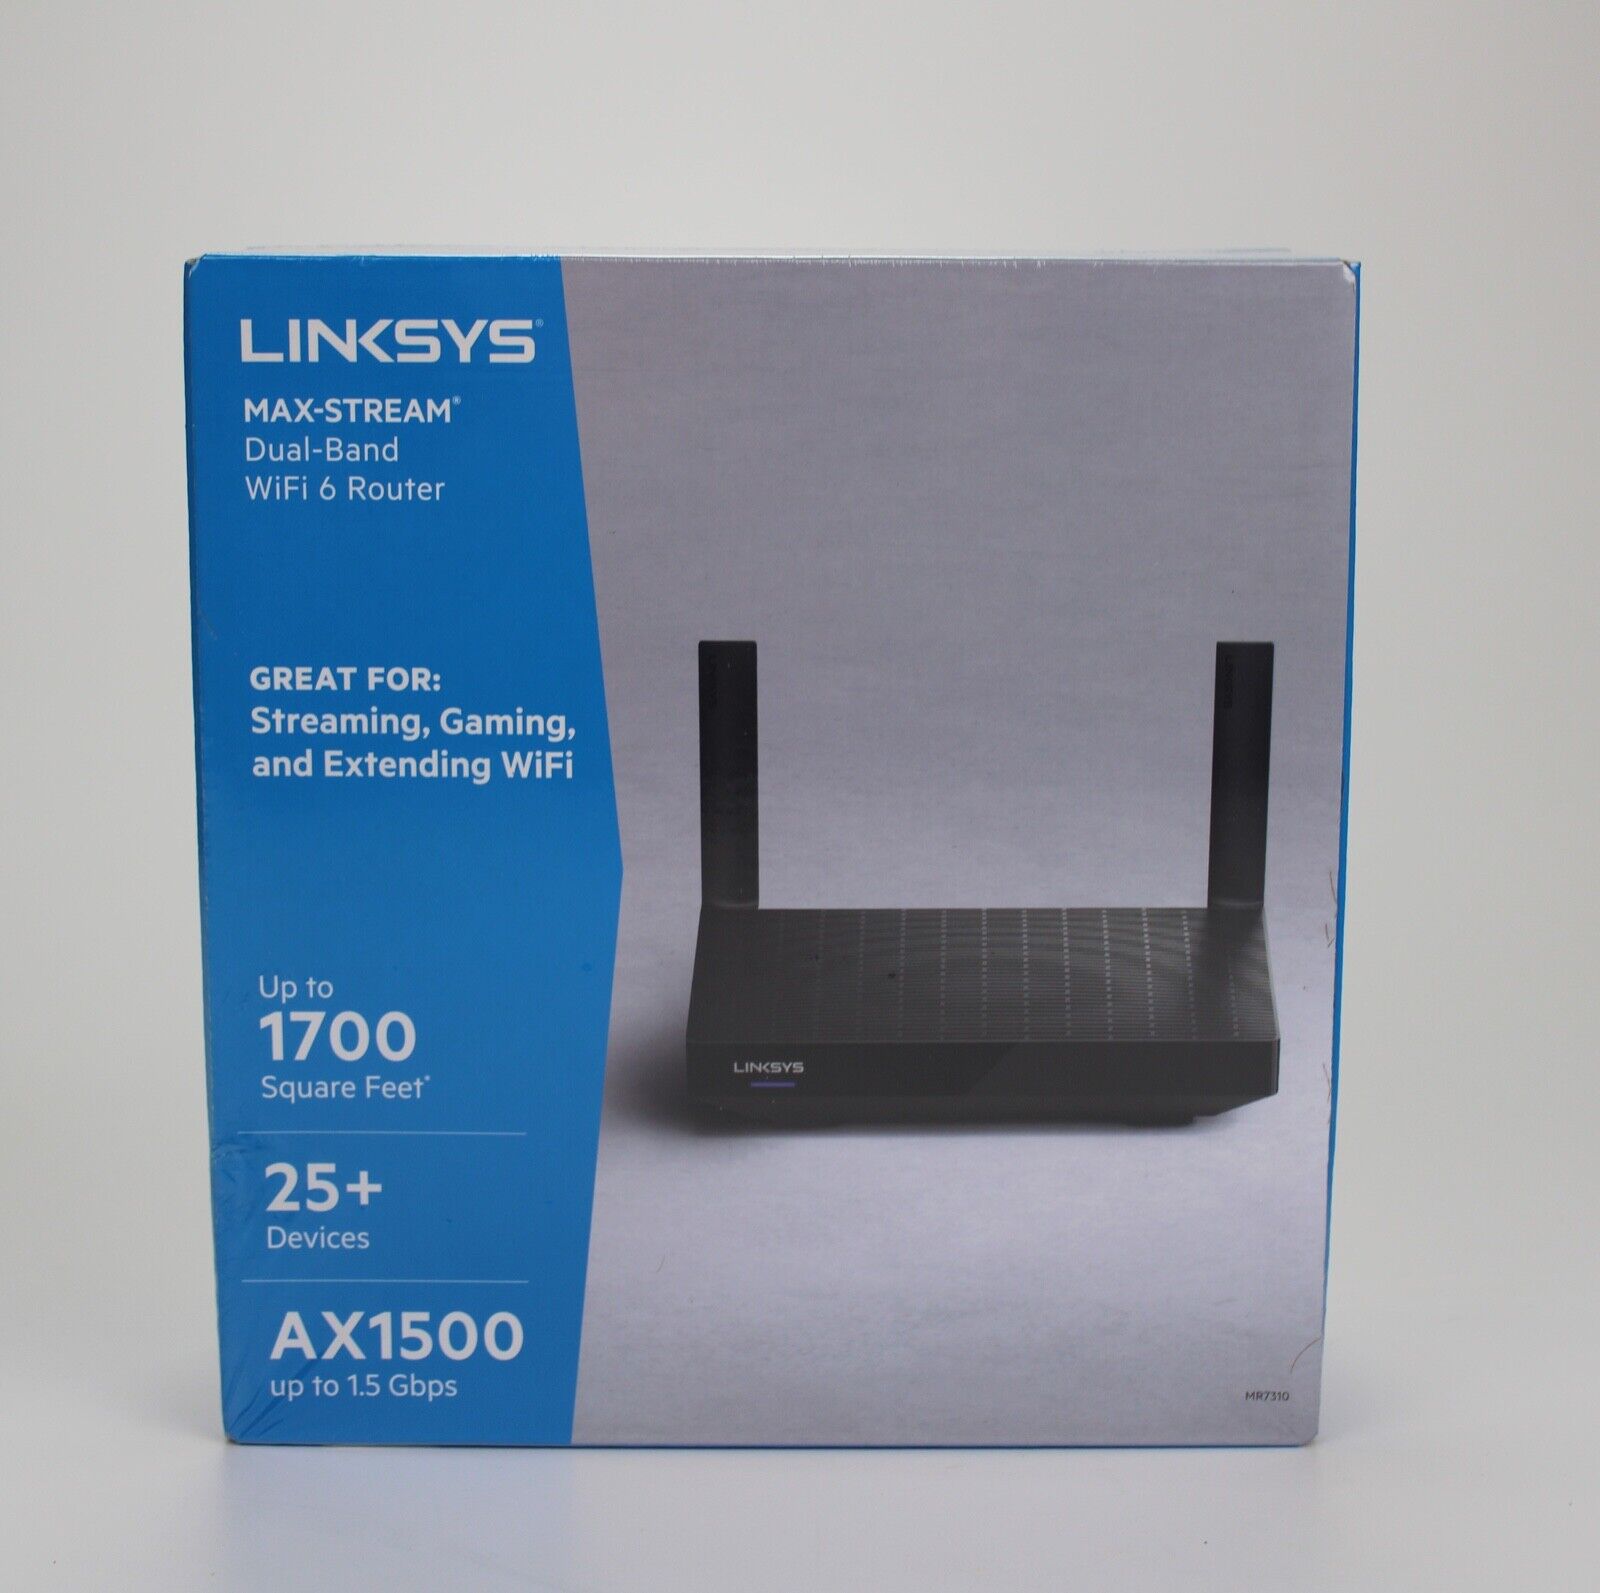 Linksys AX1500 (MR7350) Max-Stream Dual-Band Wi-Fi 6 Router